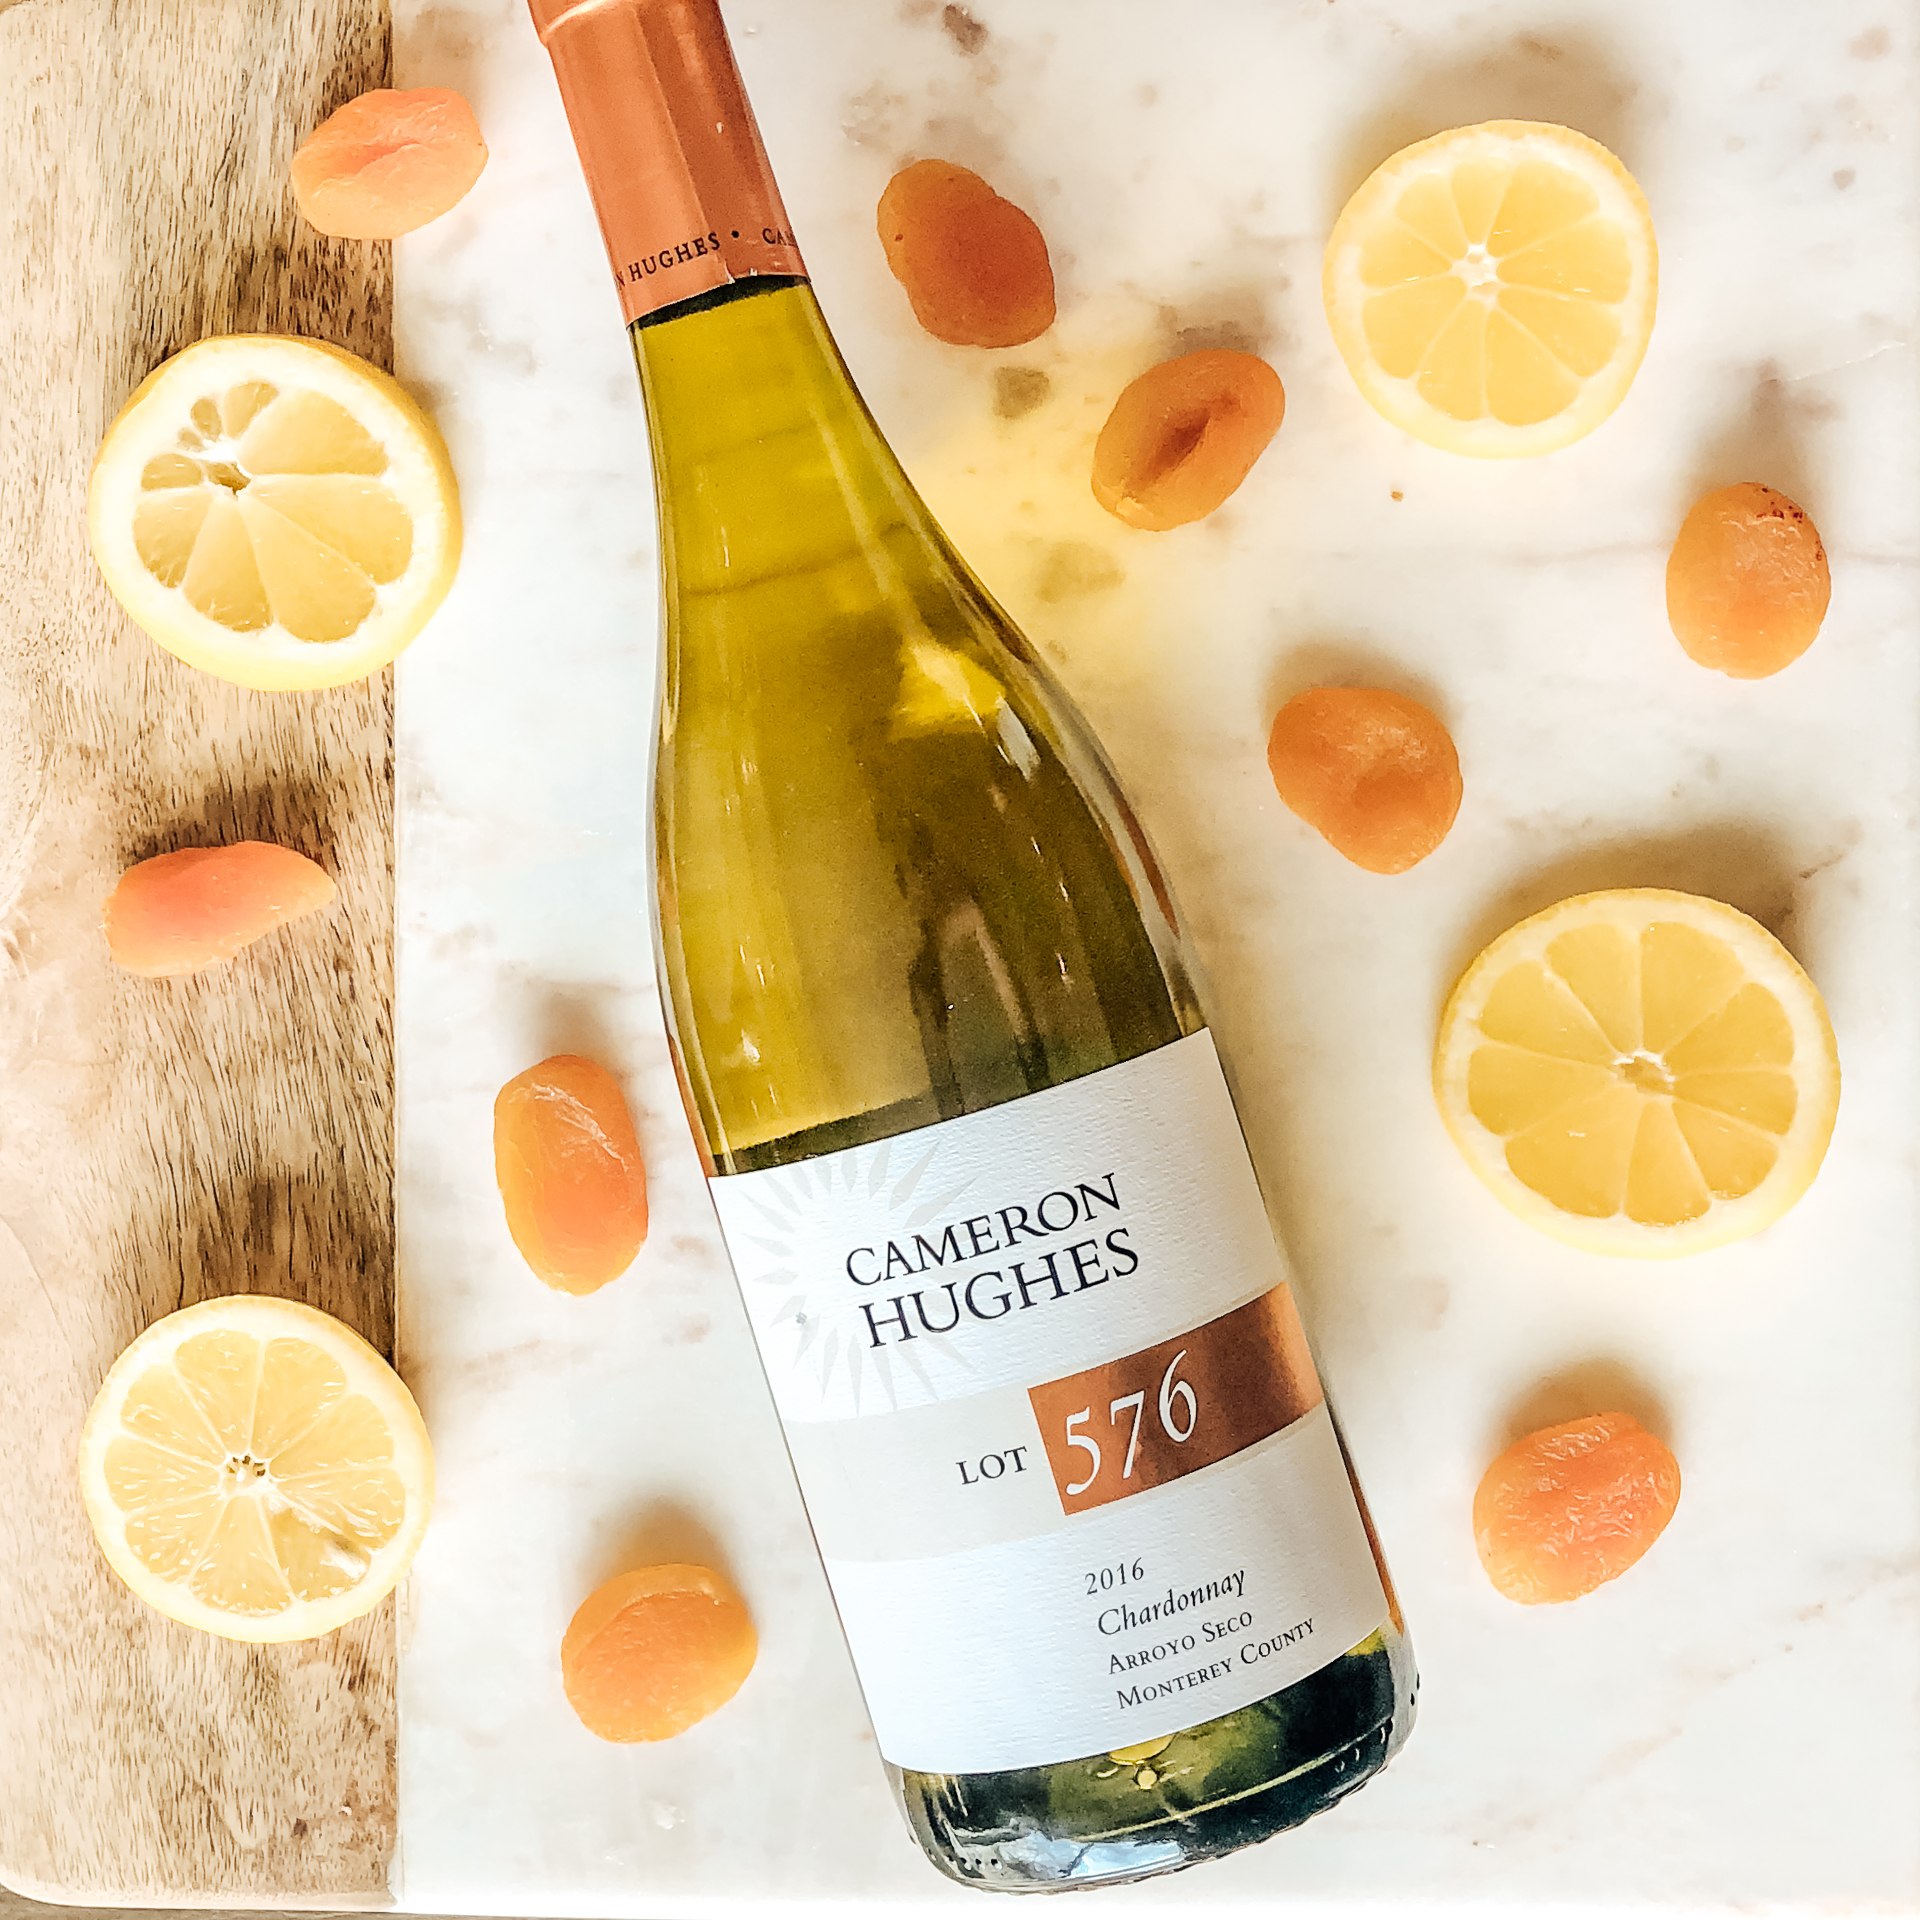 Cameron Hughes Lot 576 Chardonnay with lemons and dried peaches